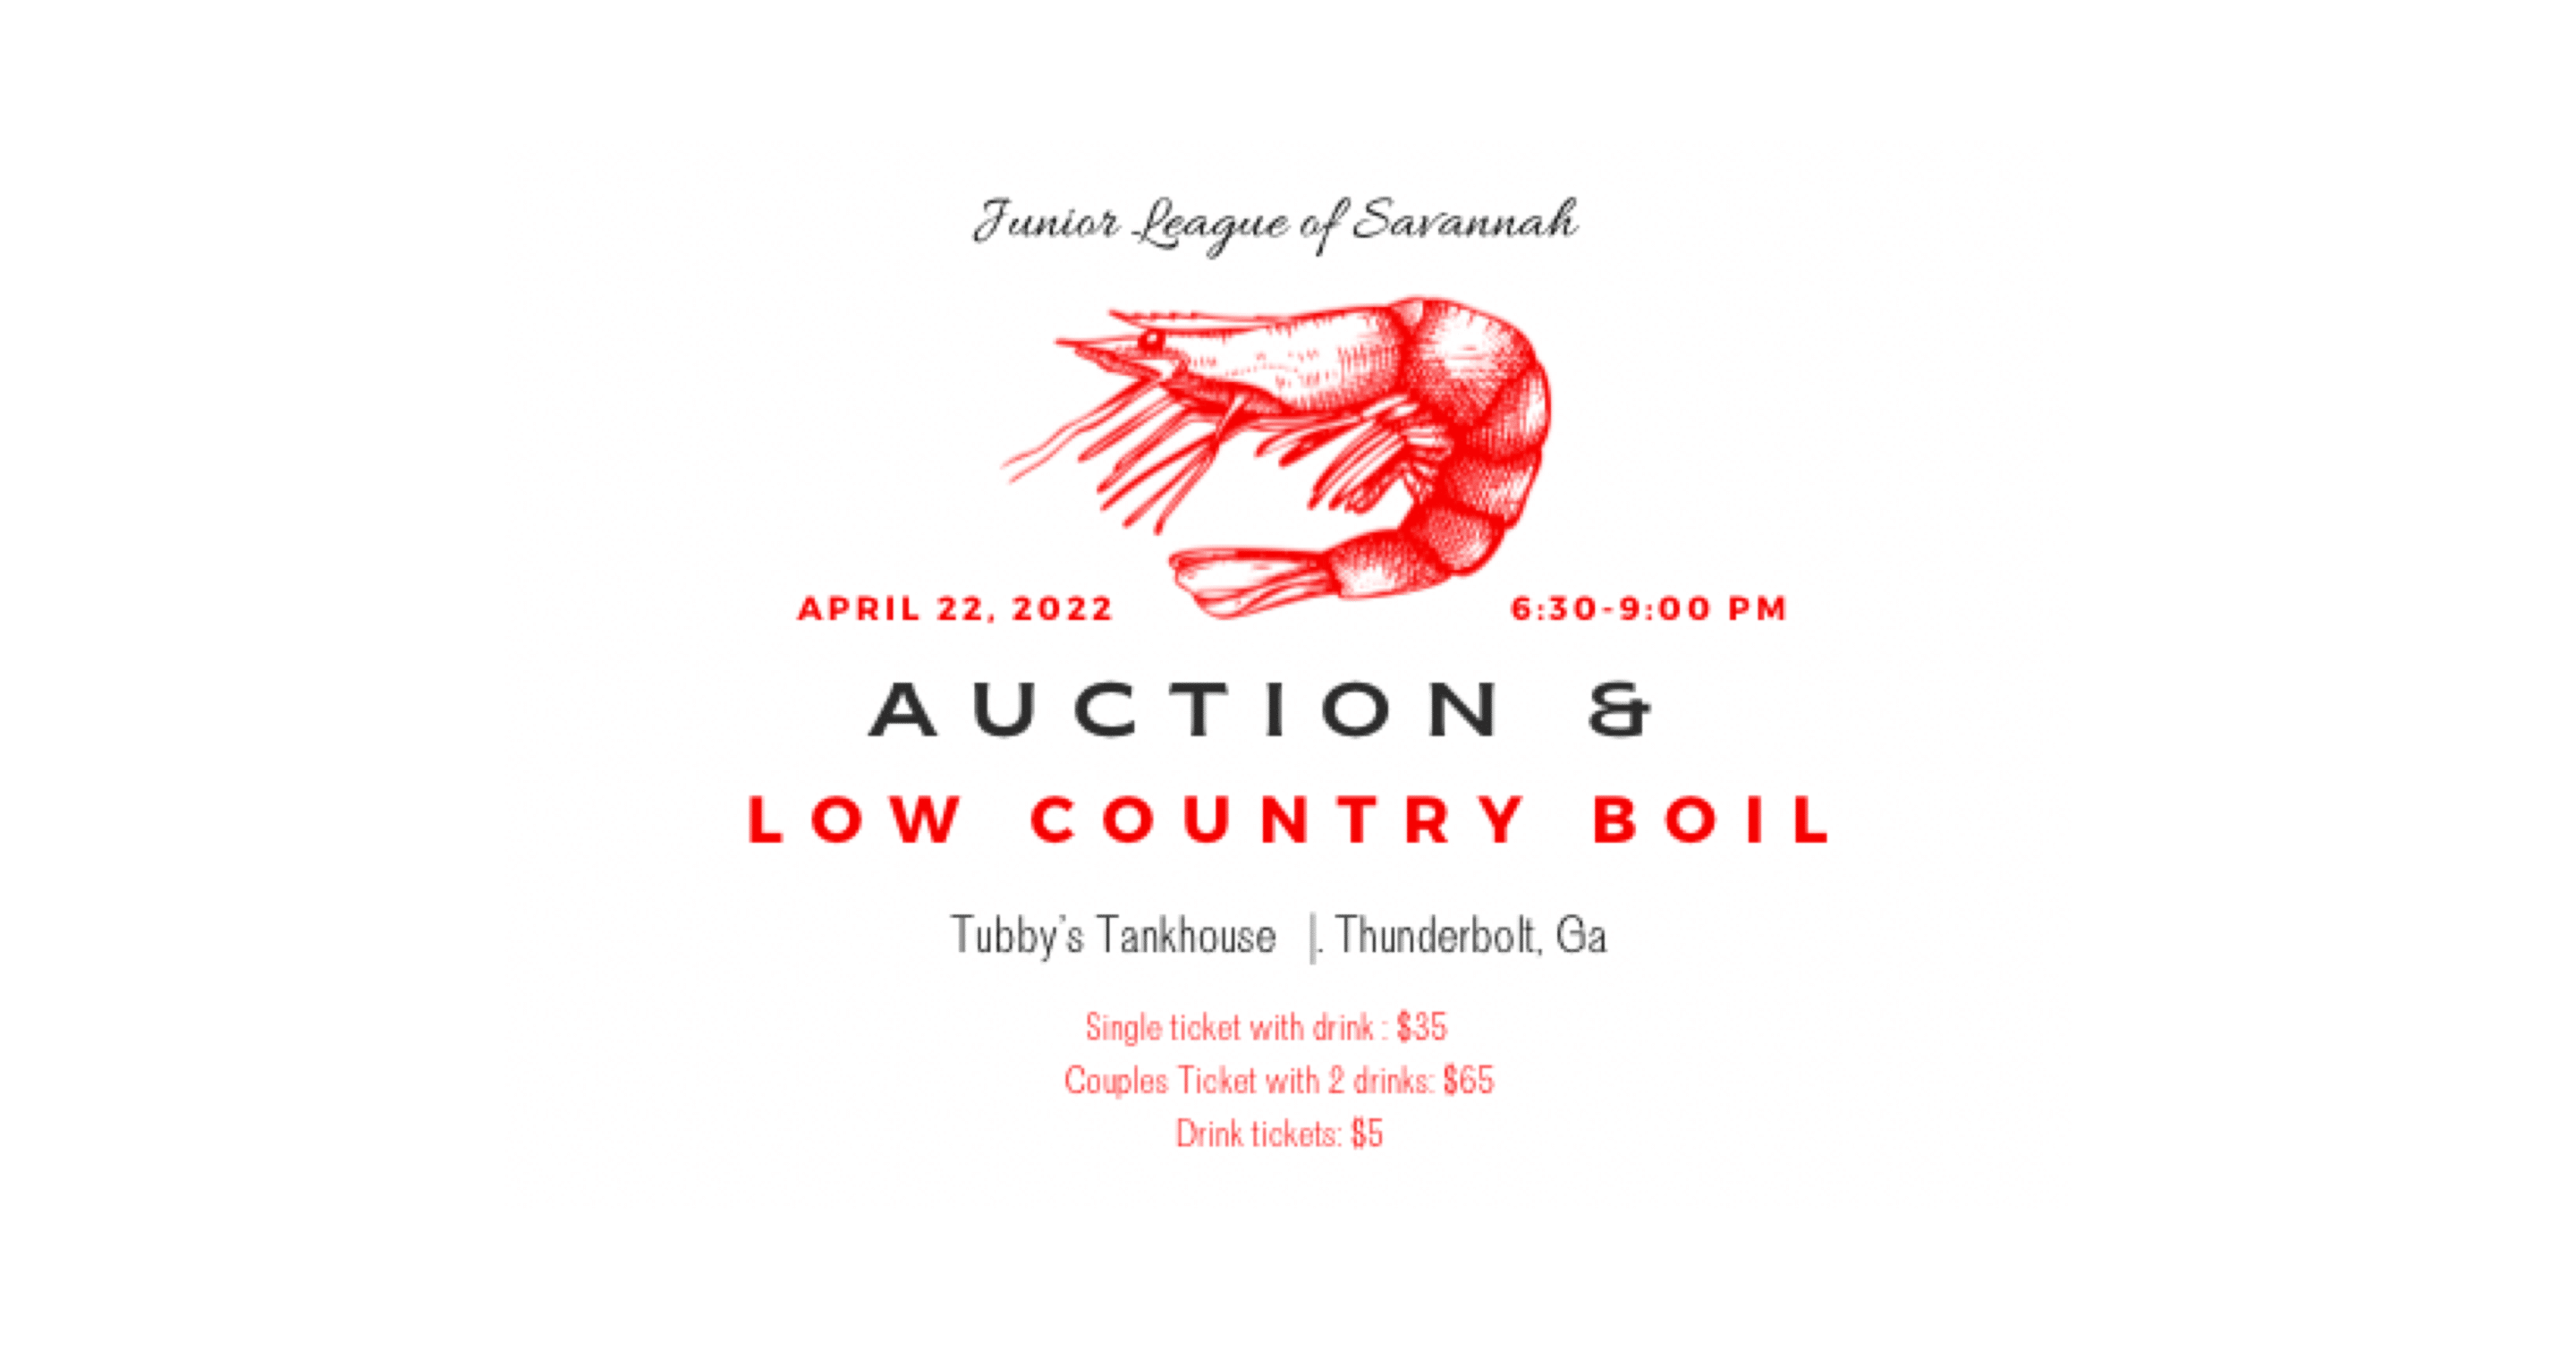 Junior League of Savannah 2022 Auction and Lowcountry Boil